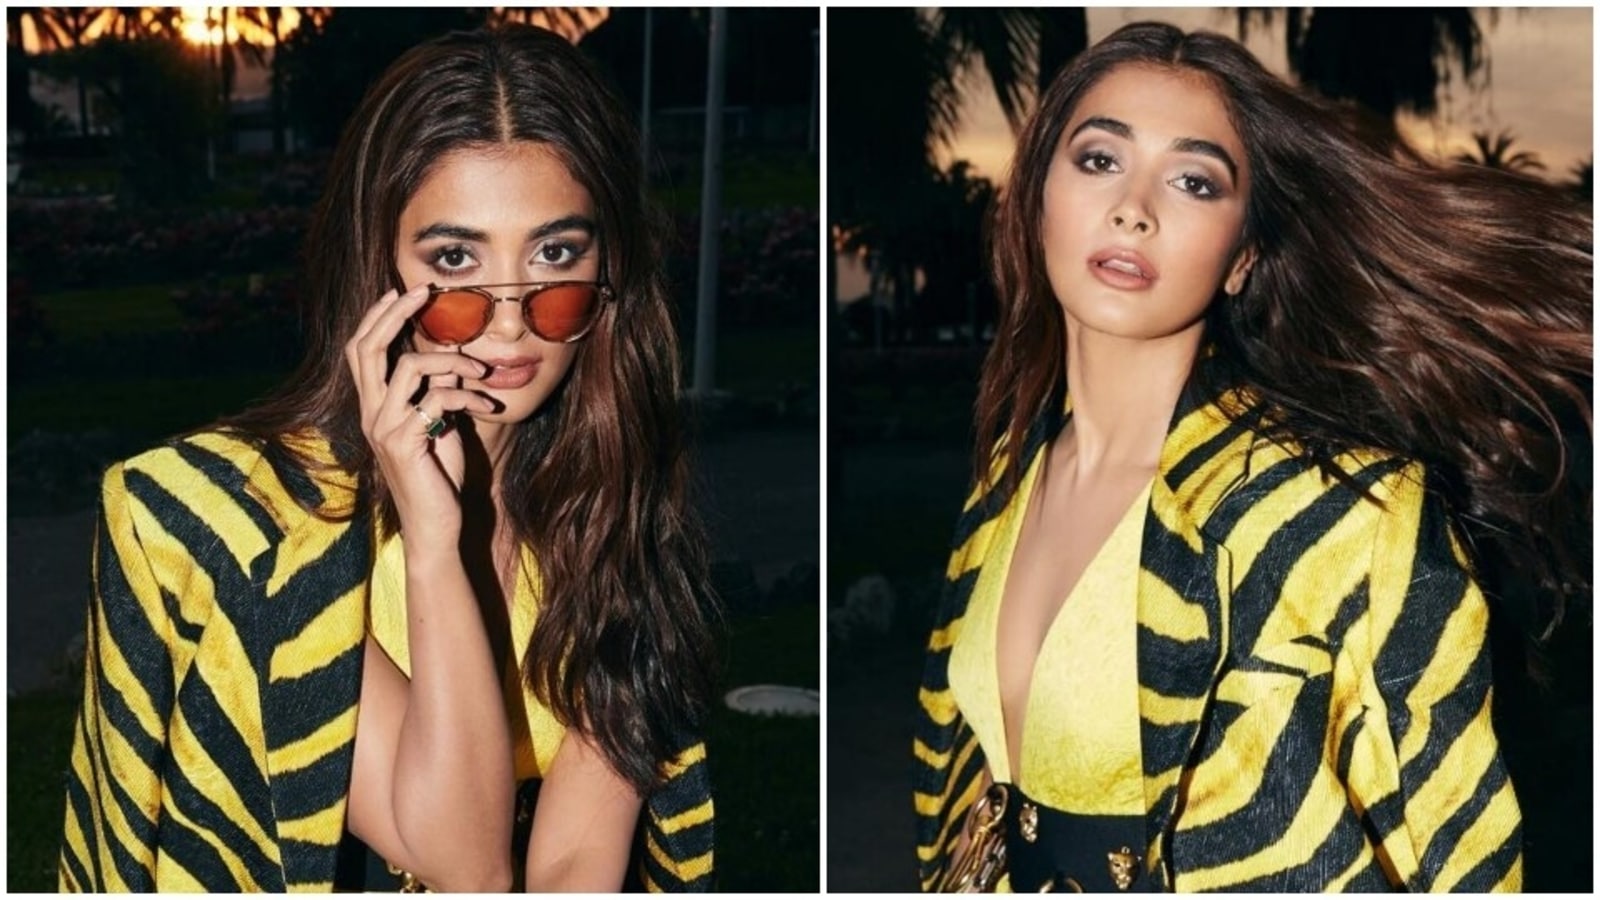 Pooja Hegde drops pics enjoying sunset during the Cannes Film Festival, slays a quirky look in mini dress and blazer